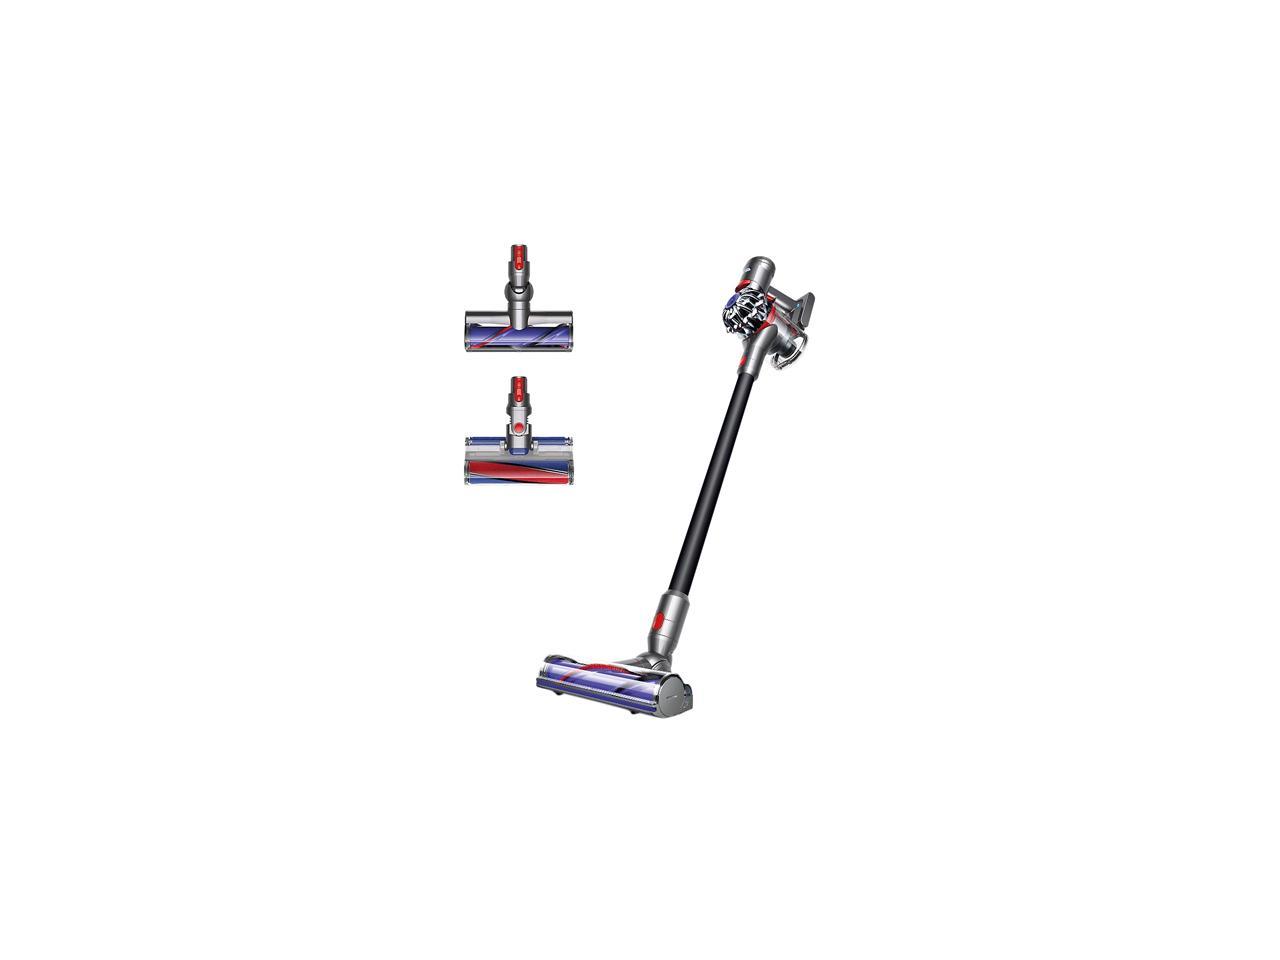 Dyson V7 Absolute Cordless Vacuum for $249.99